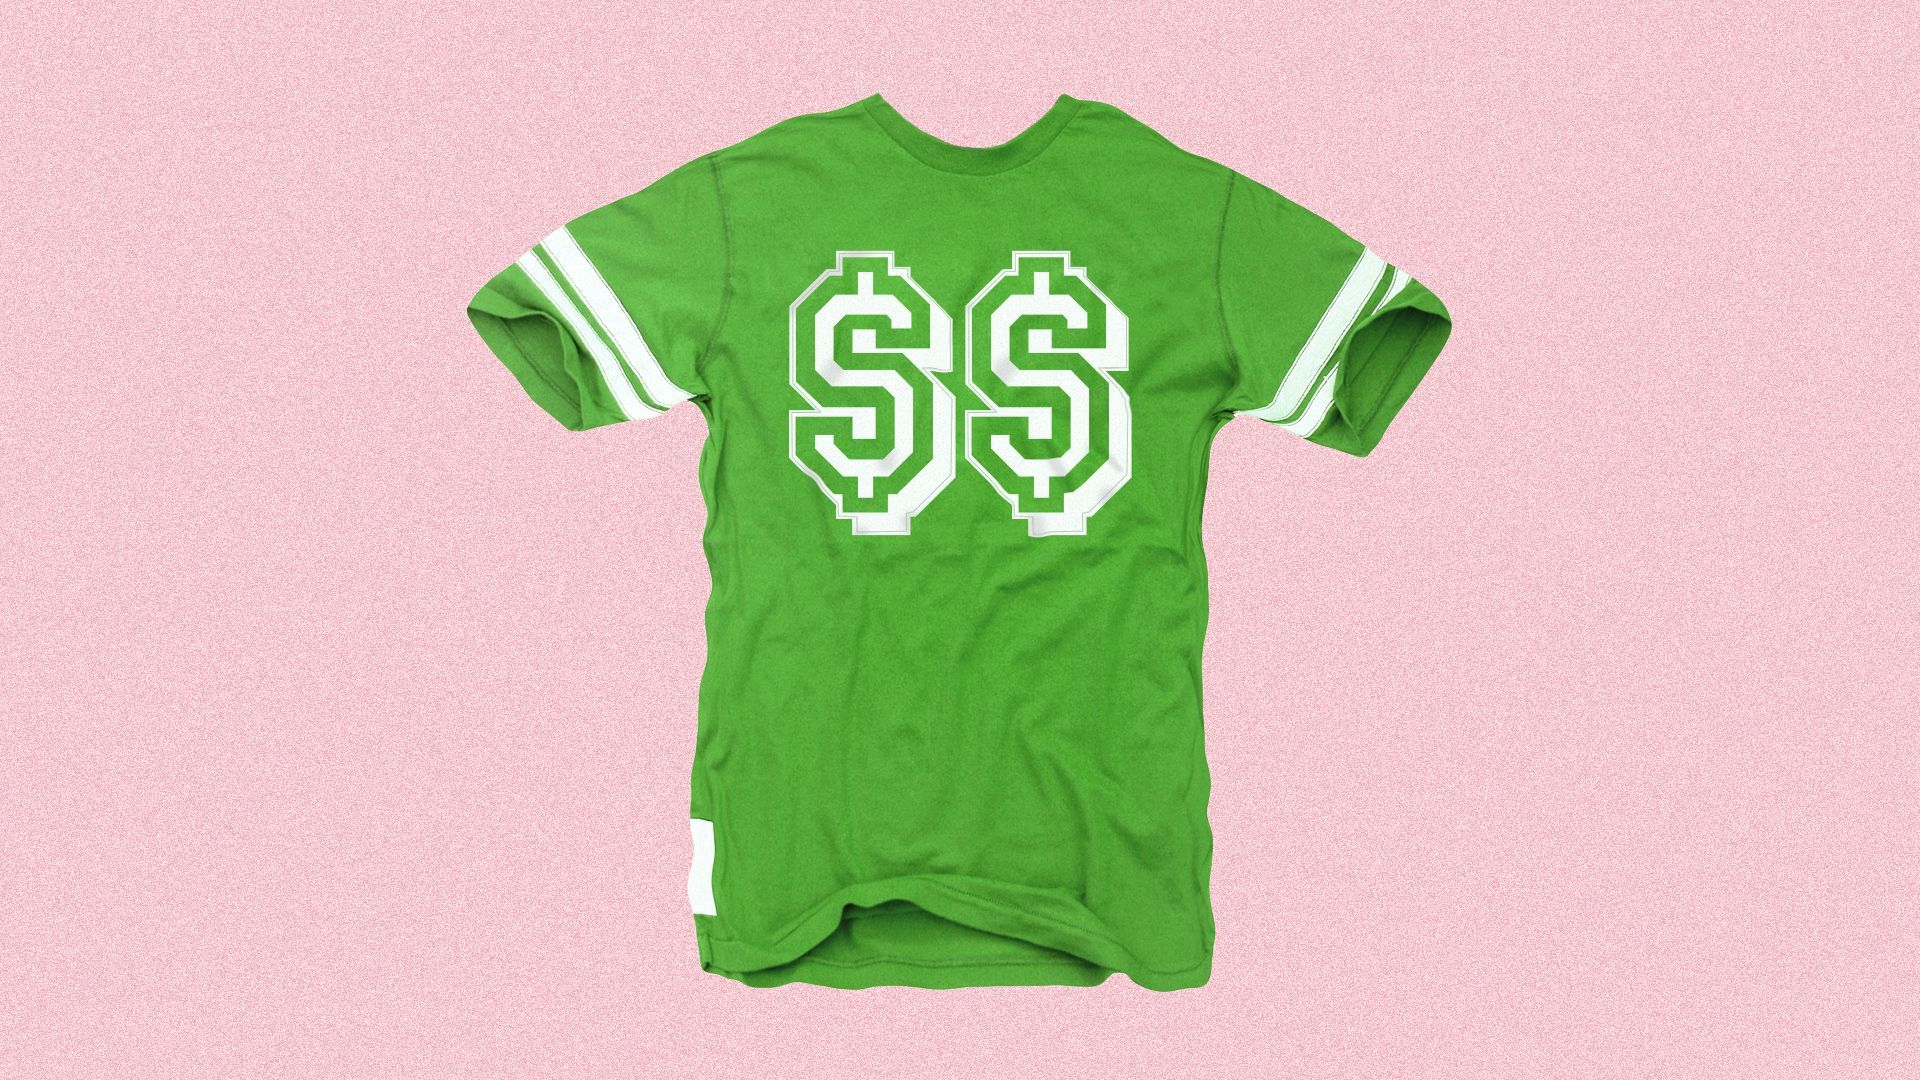 Illustration of a sports jersey with dollar bill signs on the back.